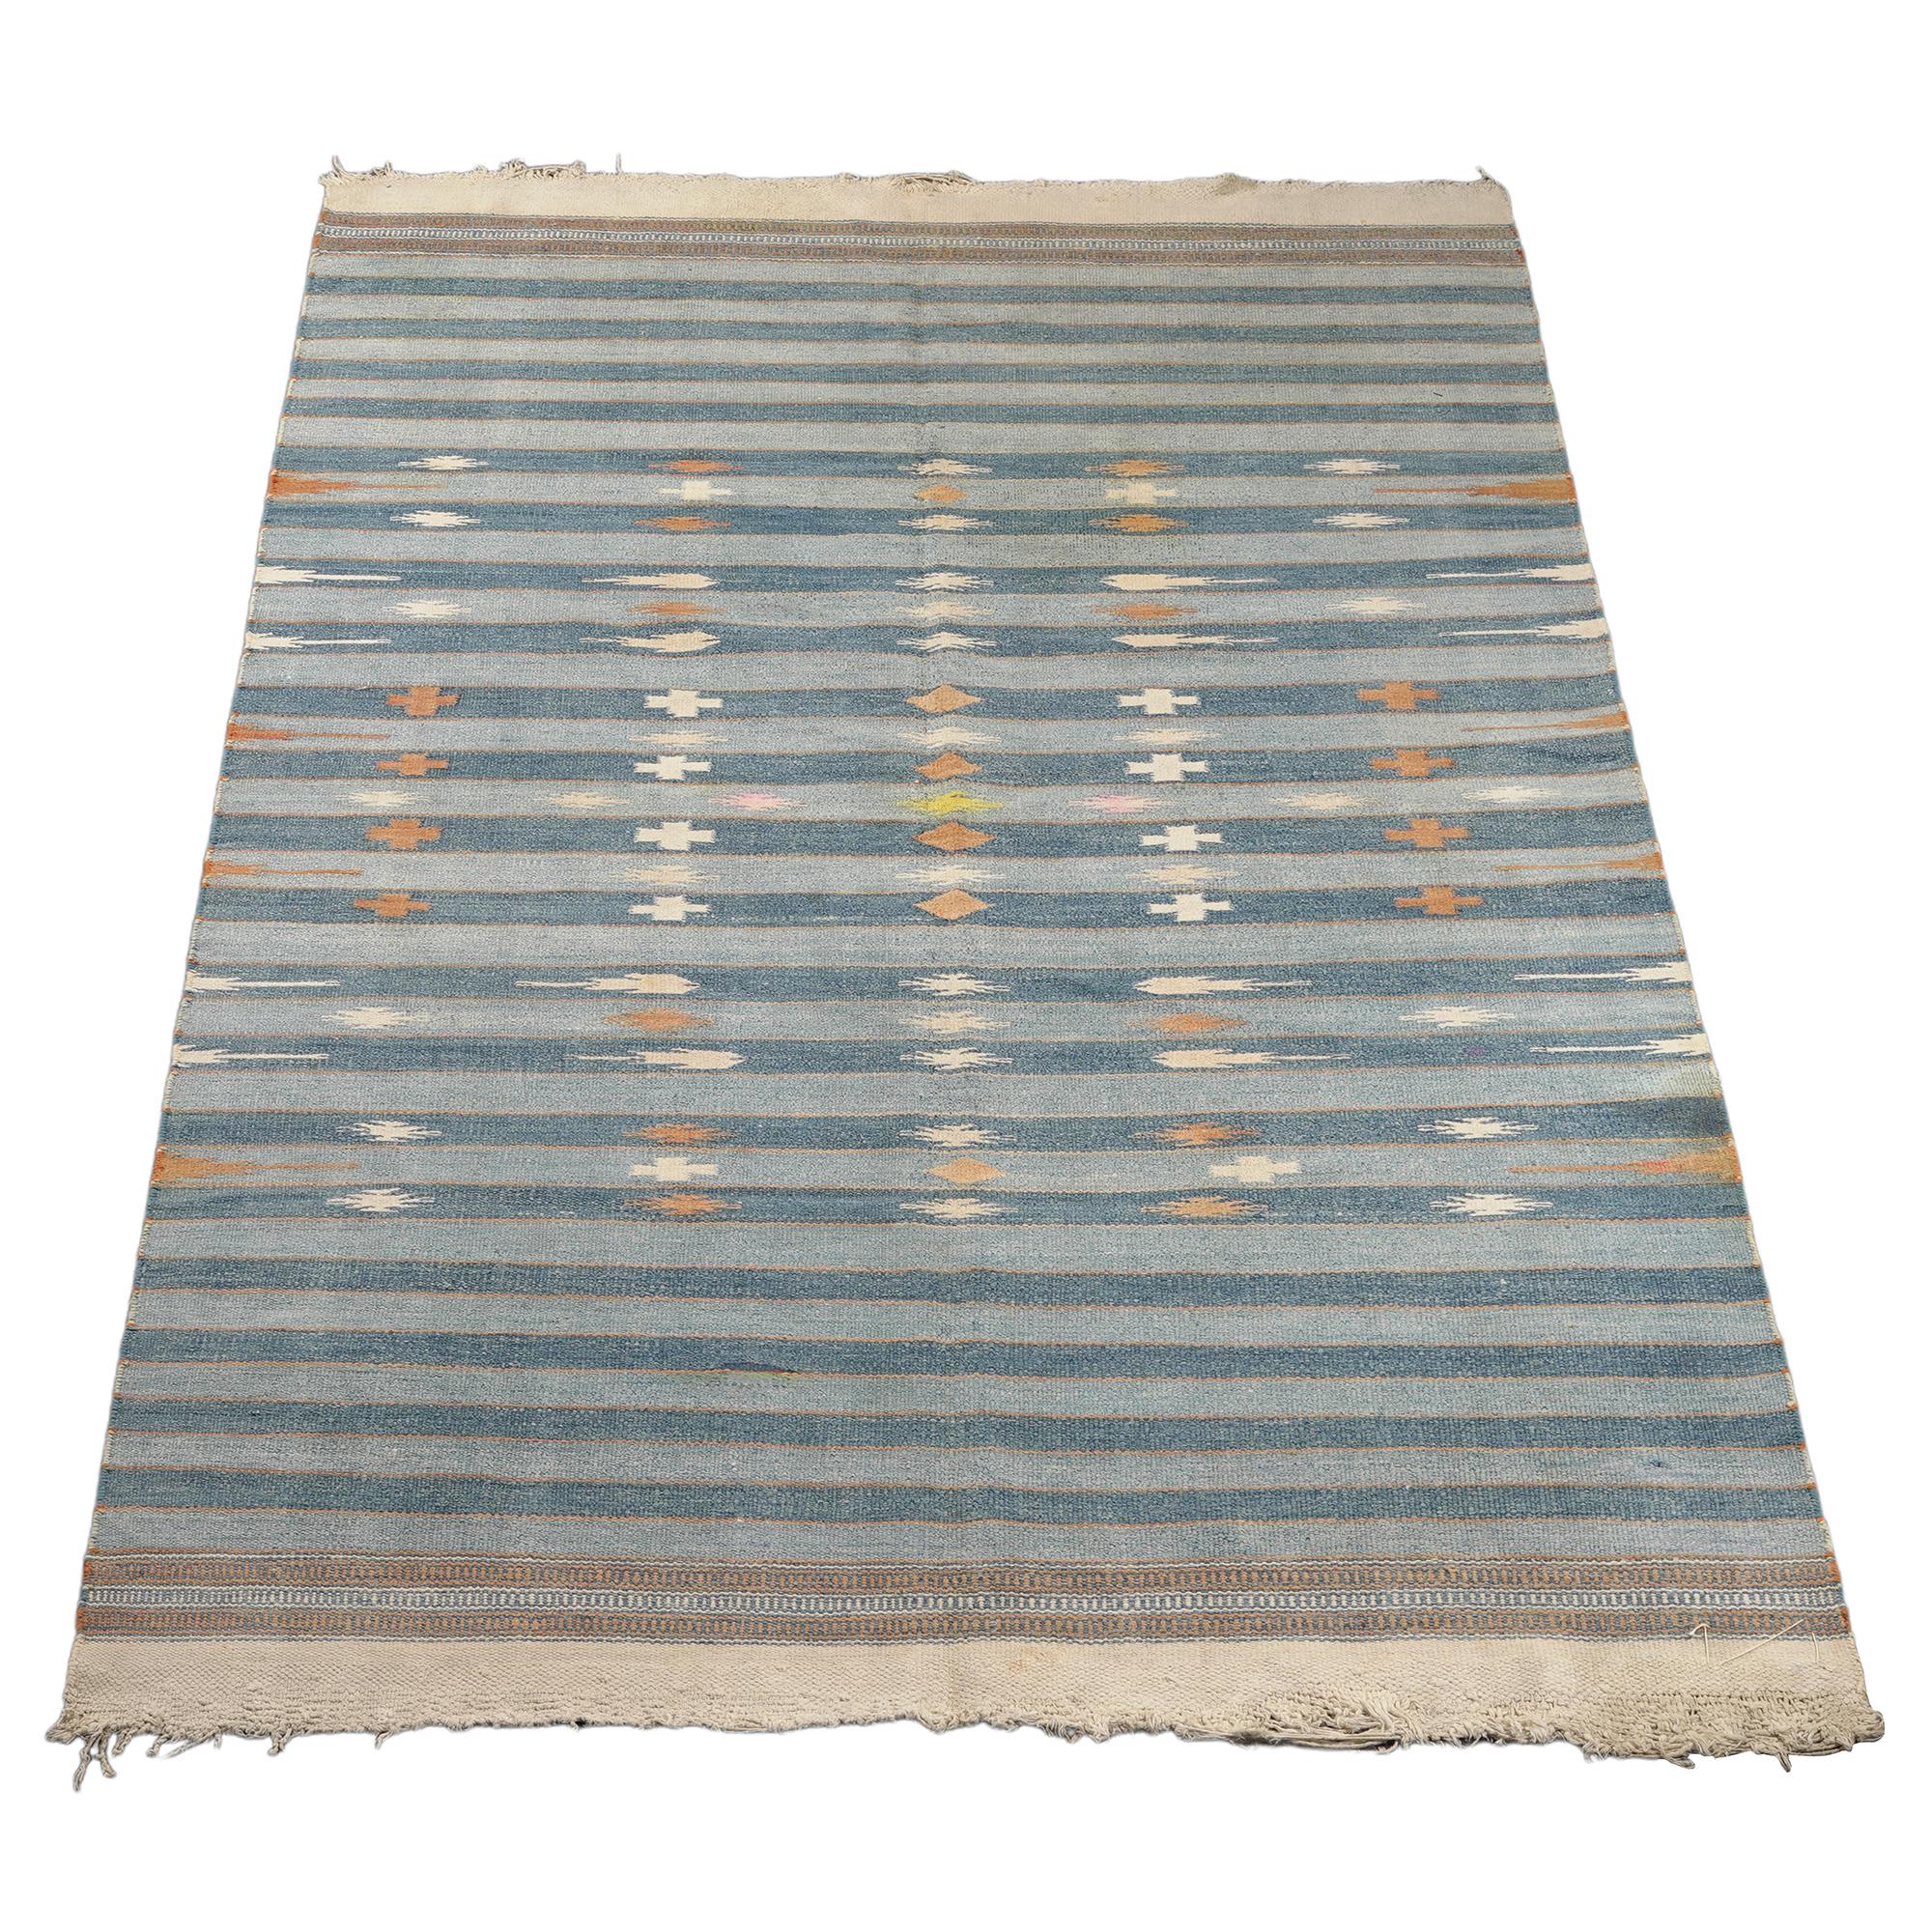 Indian Vintage Dhurrie Rug with Blue Stripes and Geometric Patterns, from Rug & Kilim For Sale